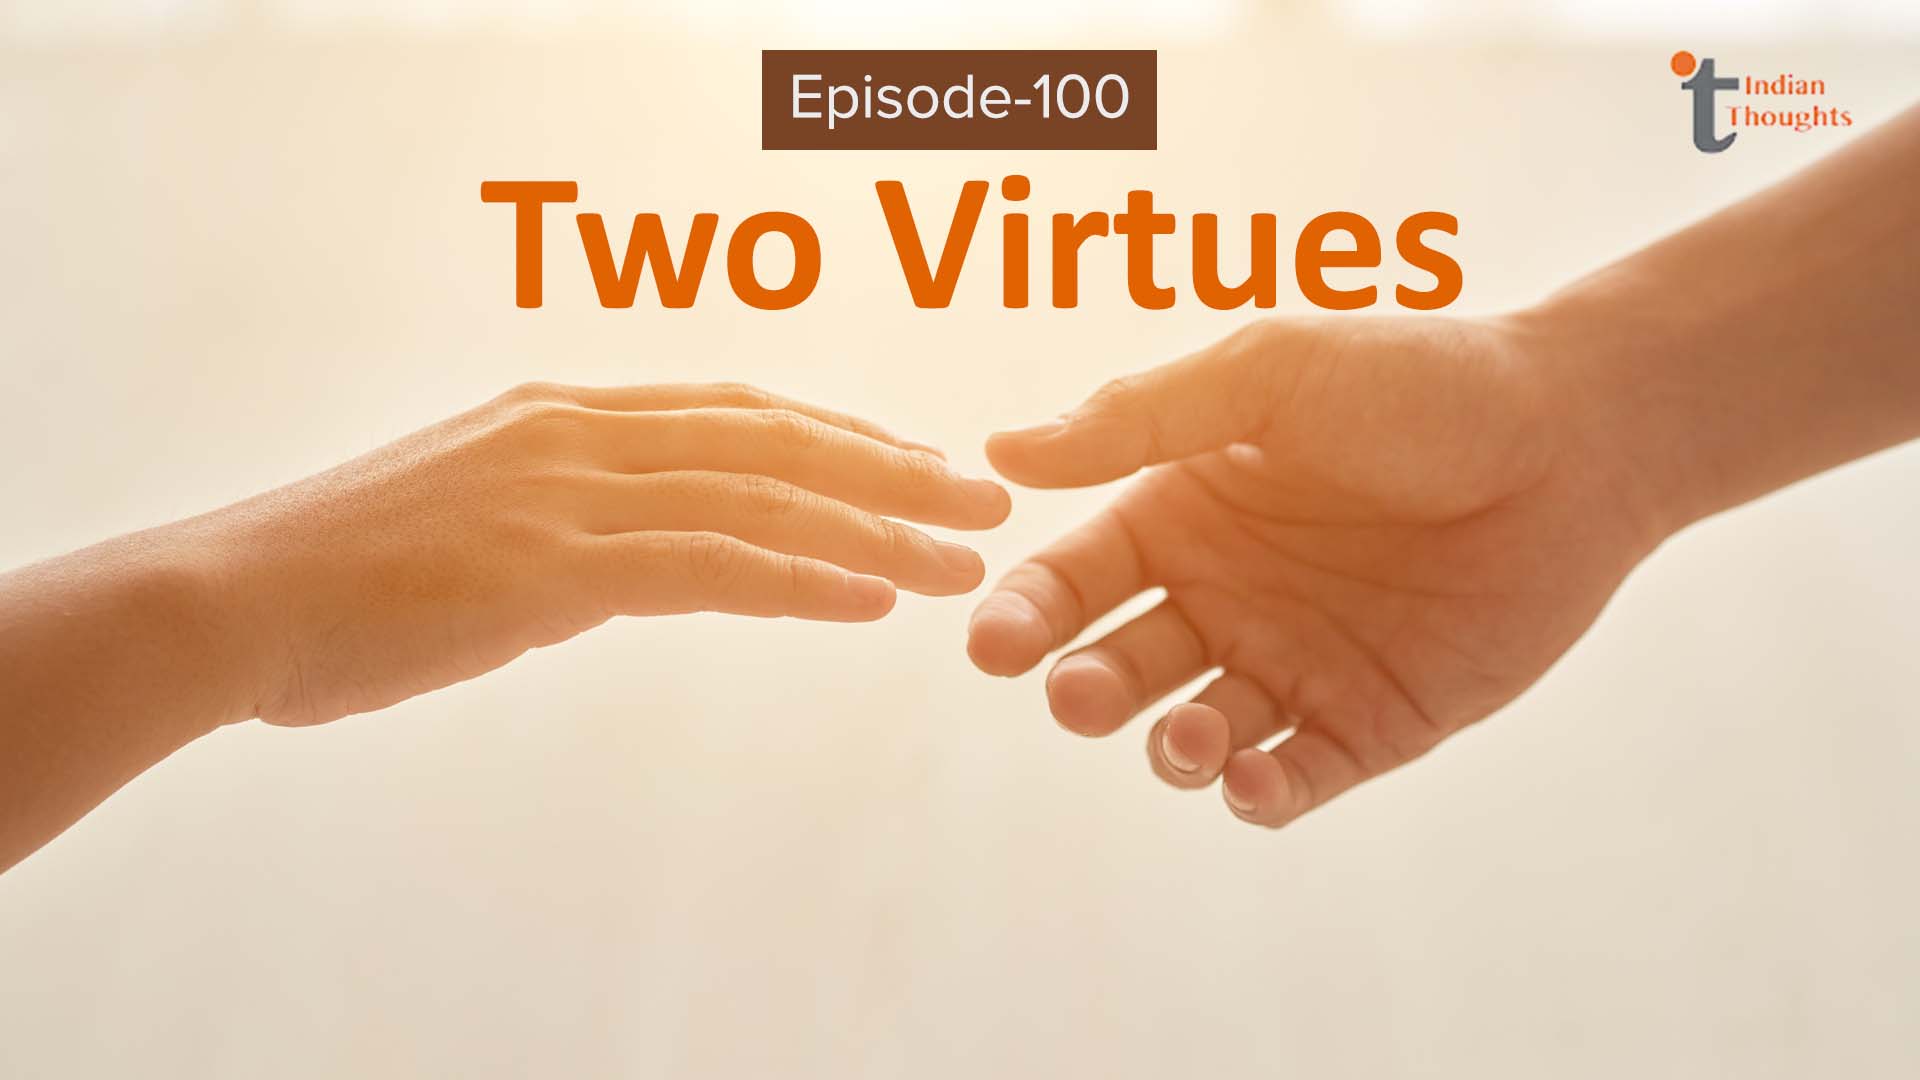 Two virtues